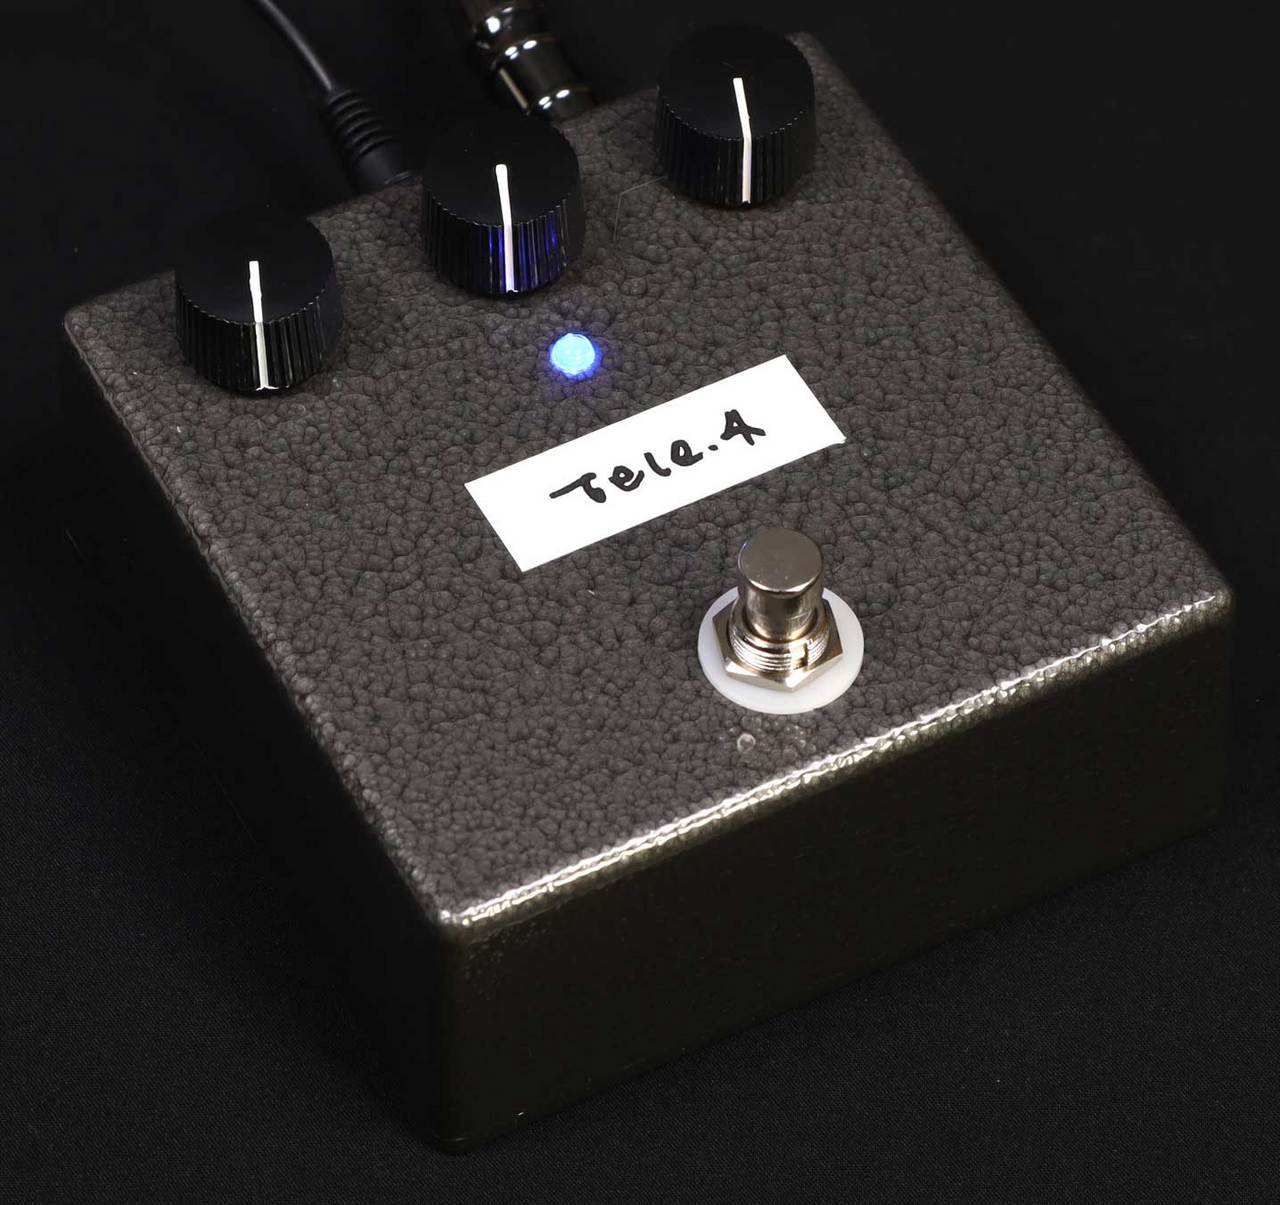 Tele.4 amplifier Tele.4 pedal Overdrive/Booster オーバードライブ